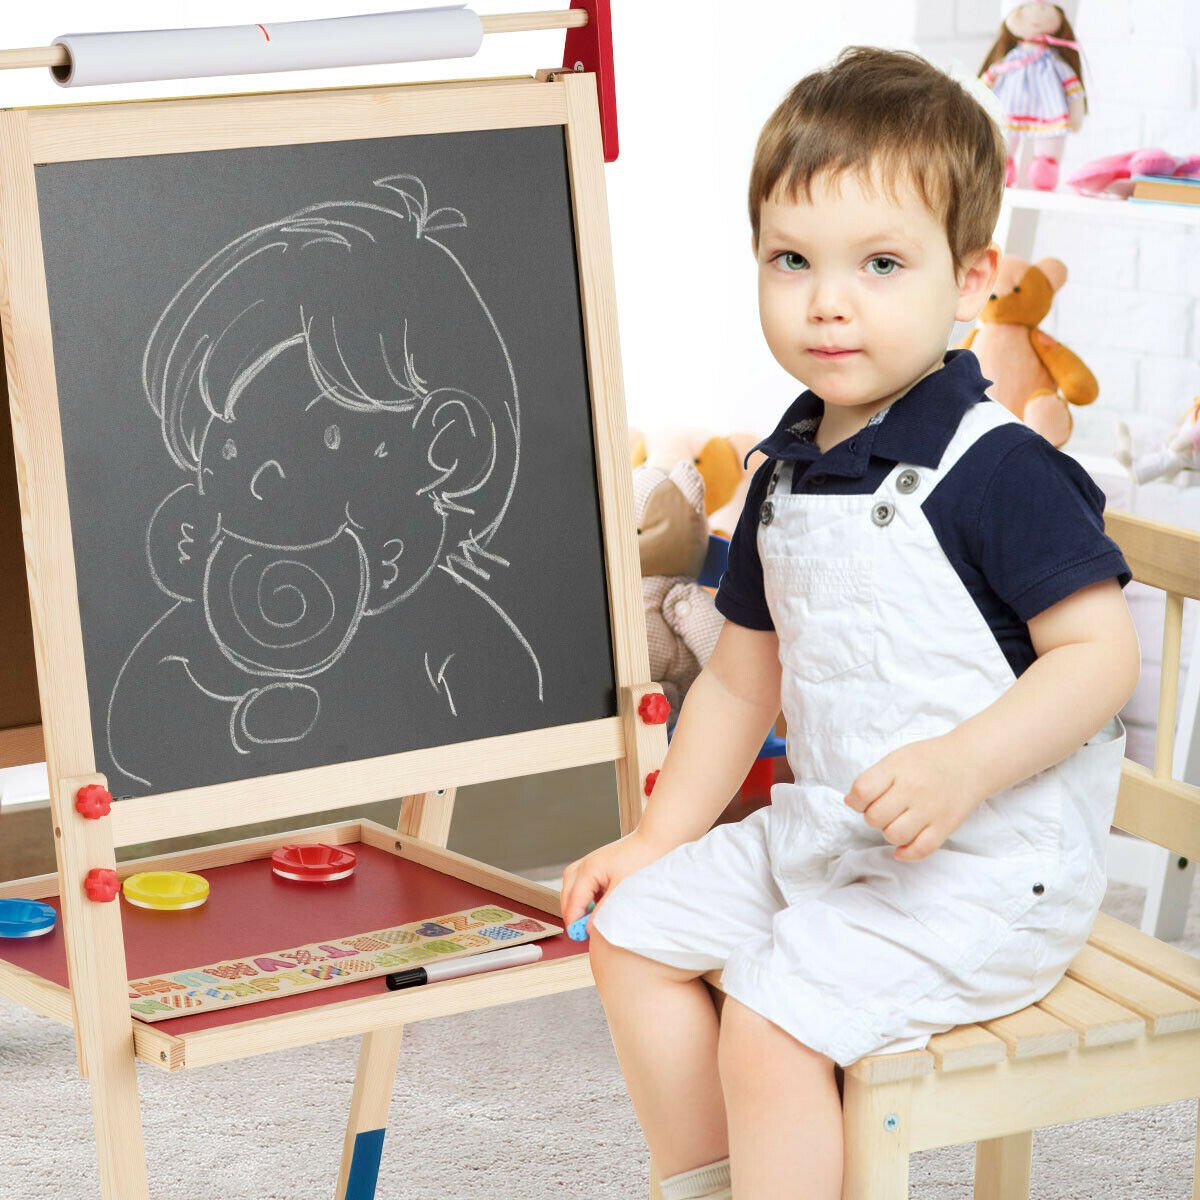 All-in-One Wooden Height Adjustable Kid's Art Easel with Magnetic Stickers and Paper, Multicolor at Gallery Canada